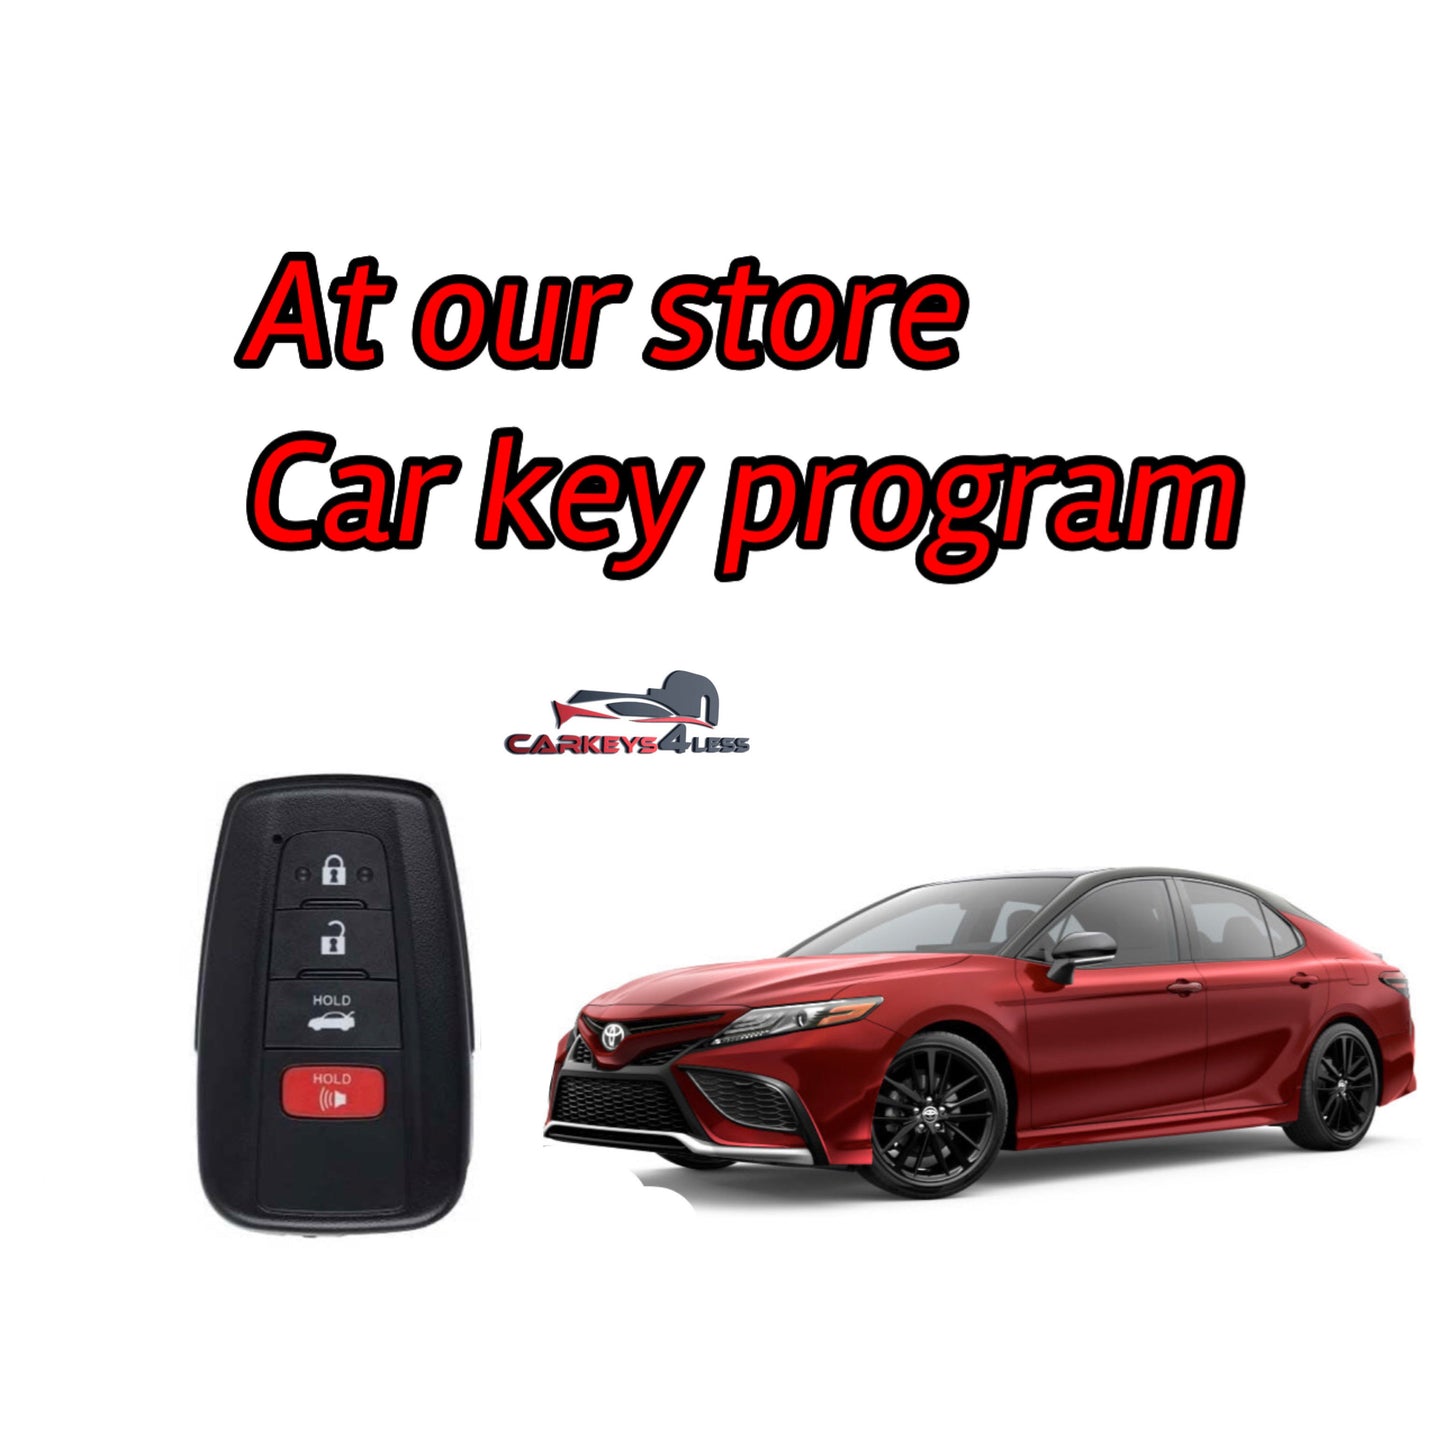 At our store a new oem  car key replacement